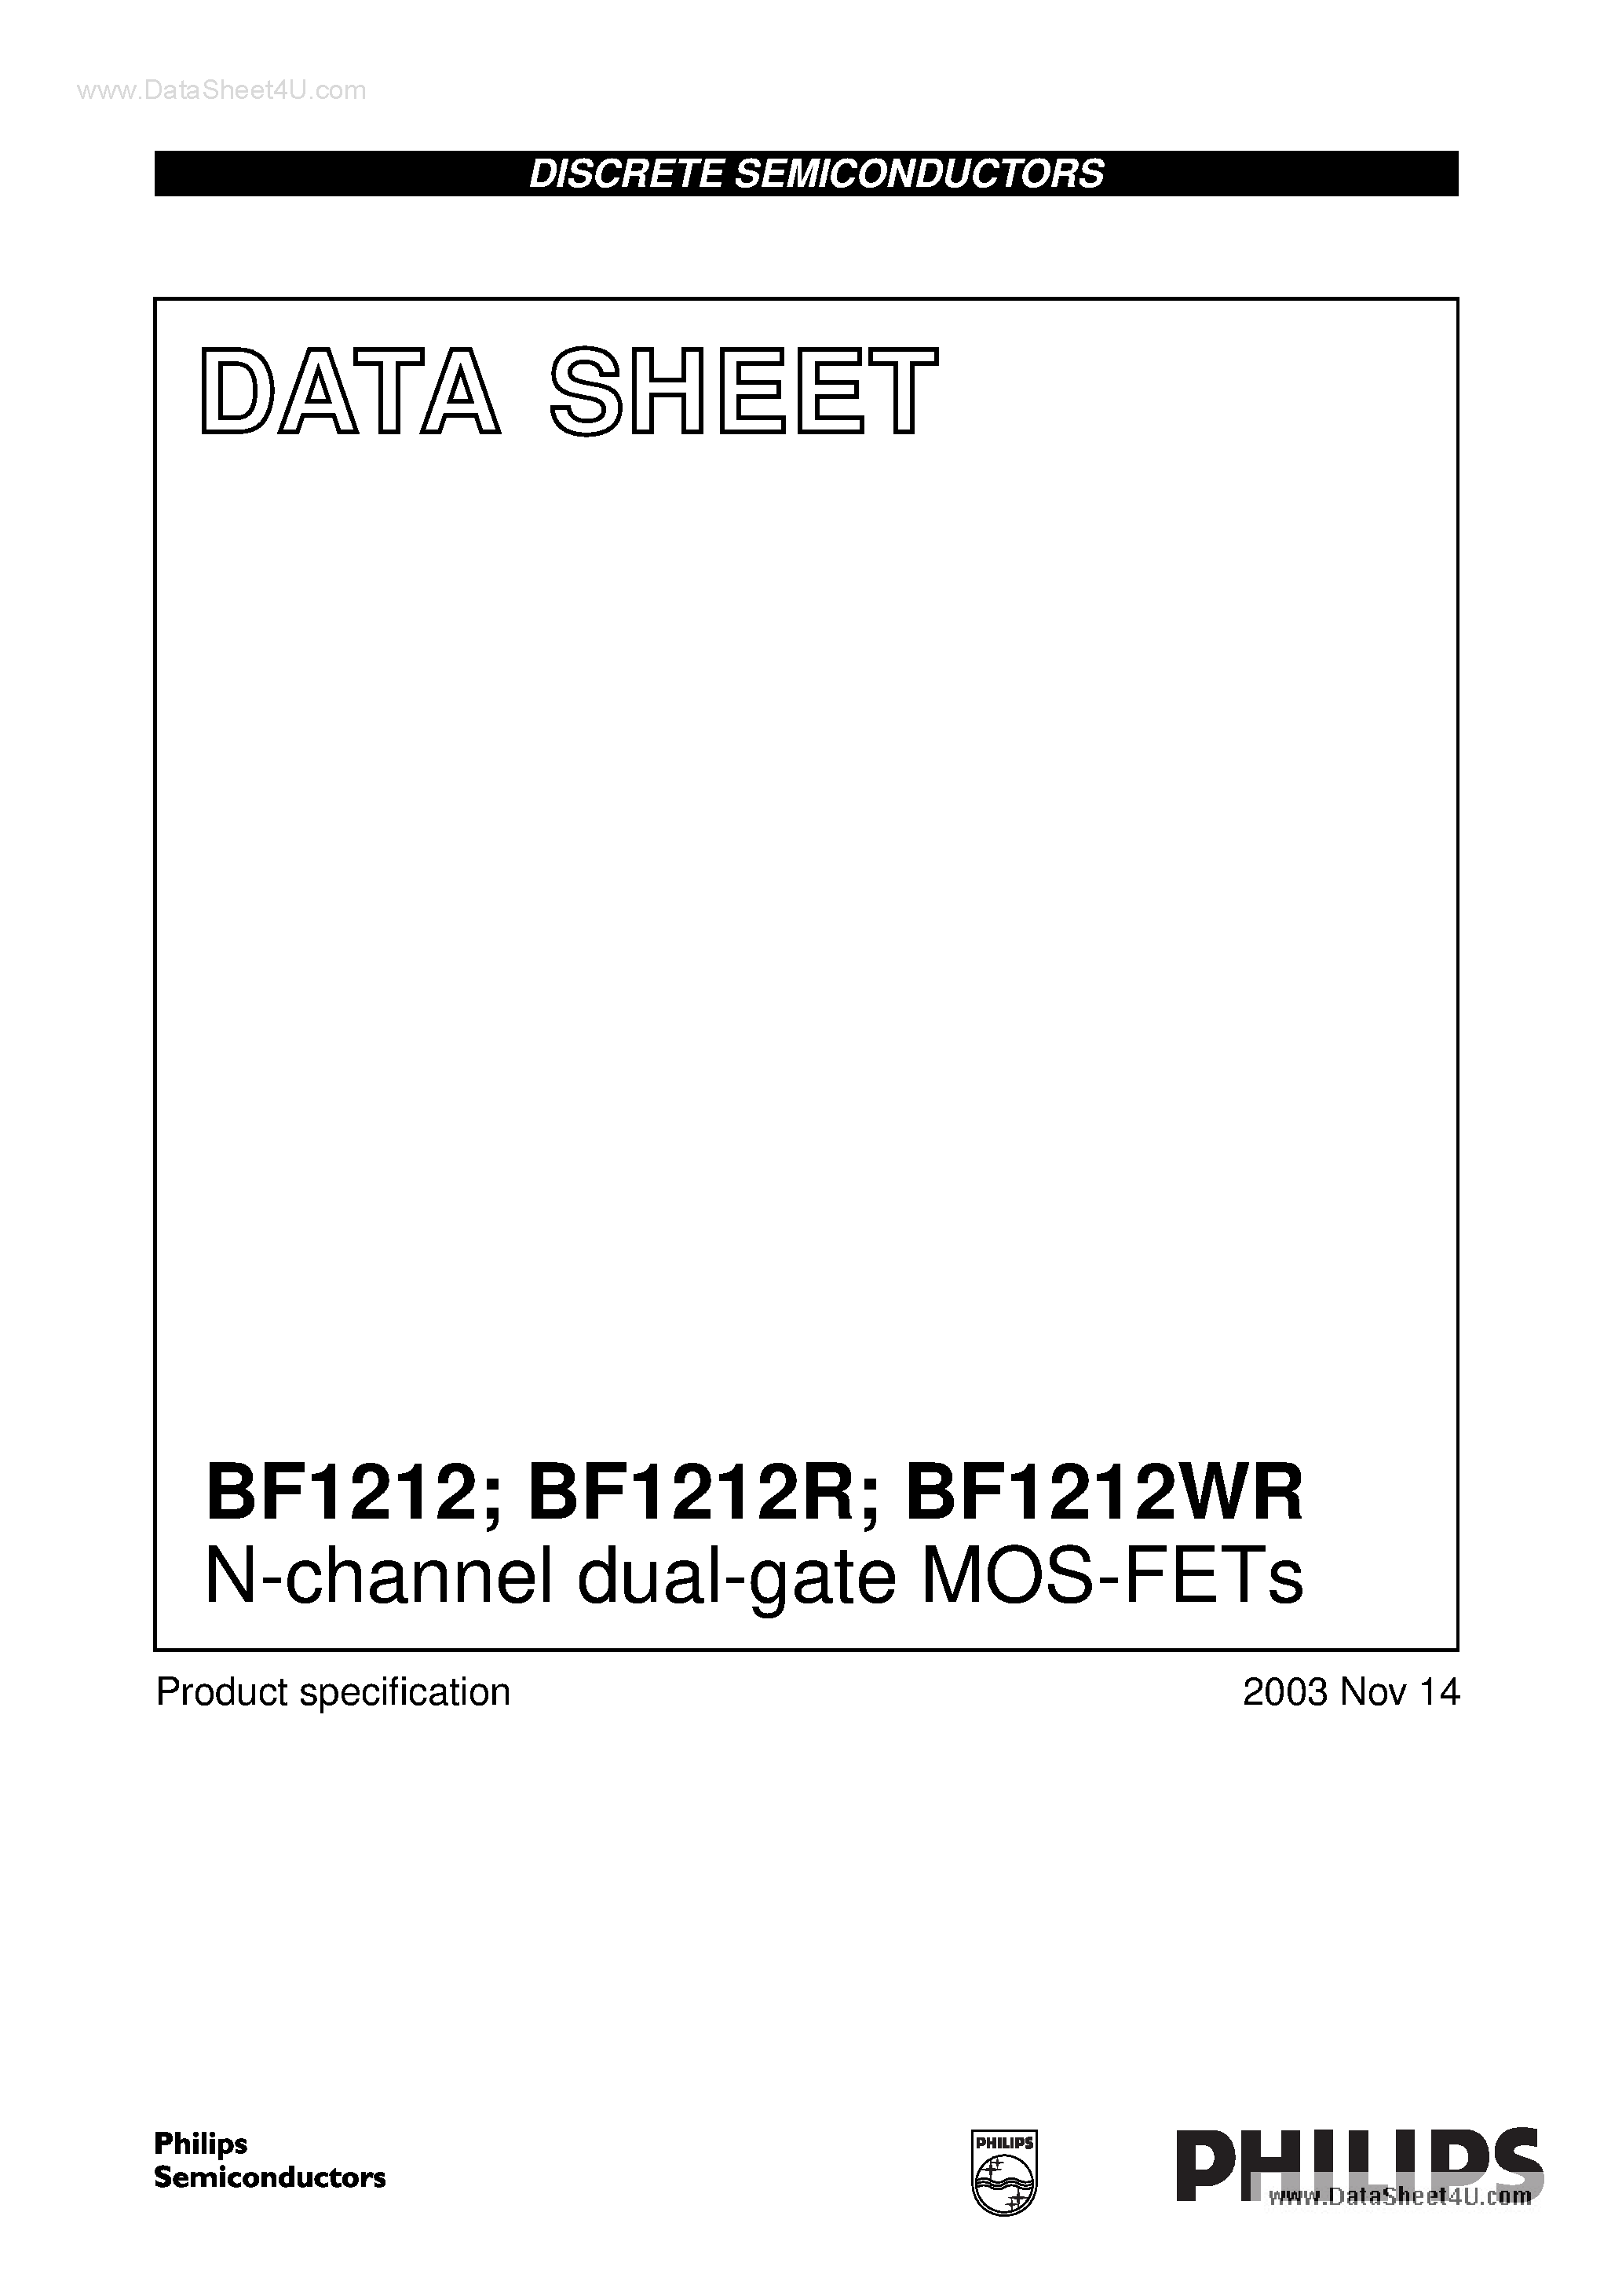 Datasheet BF1212 - N-channel dual-gate MOS-FETs page 1